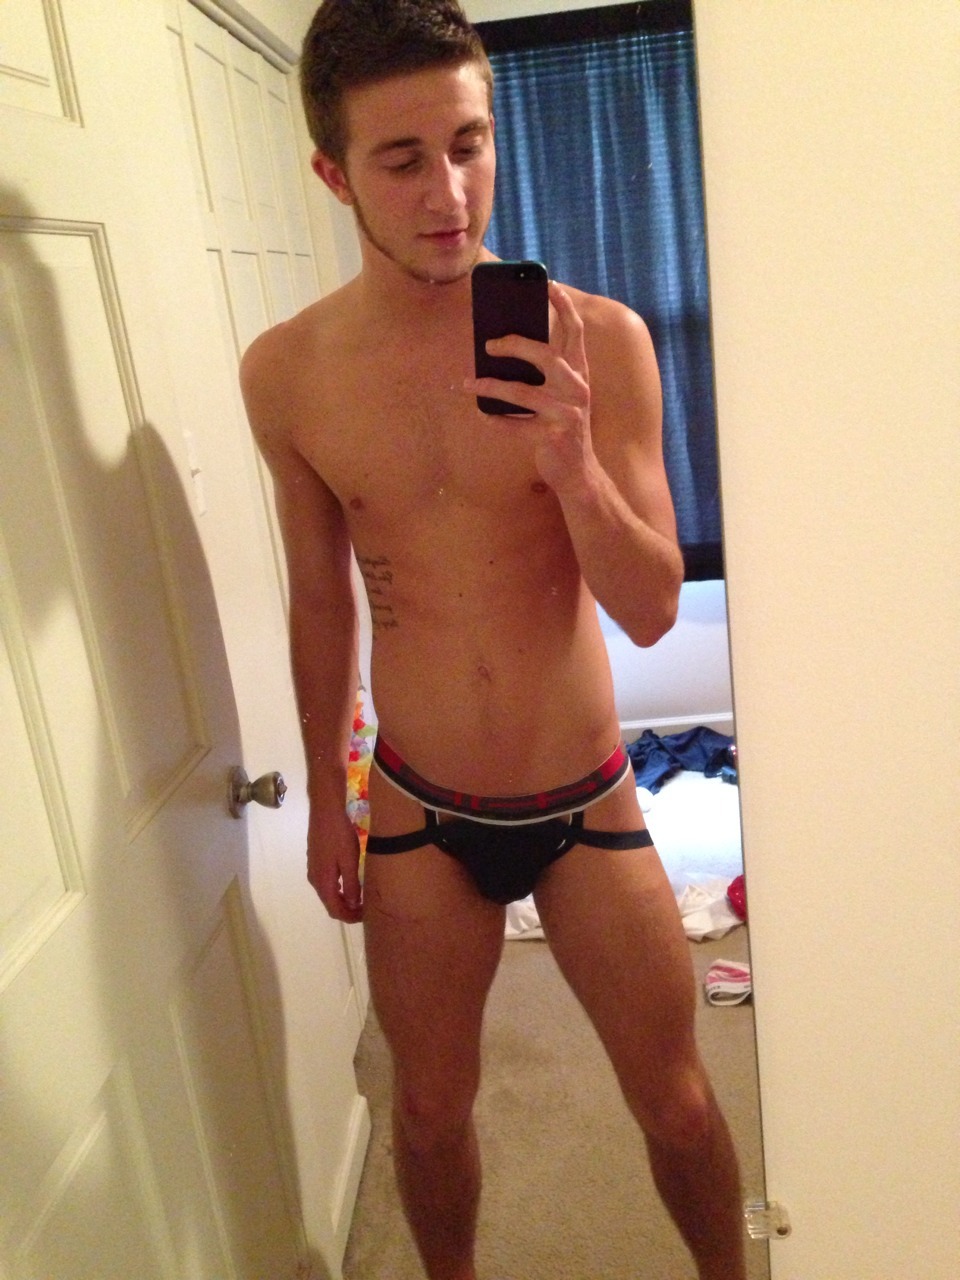 amateur-twink-ass:   Hard, Long and Th█ck C♂cks and Sm♂♂th Sweet Ass - Free